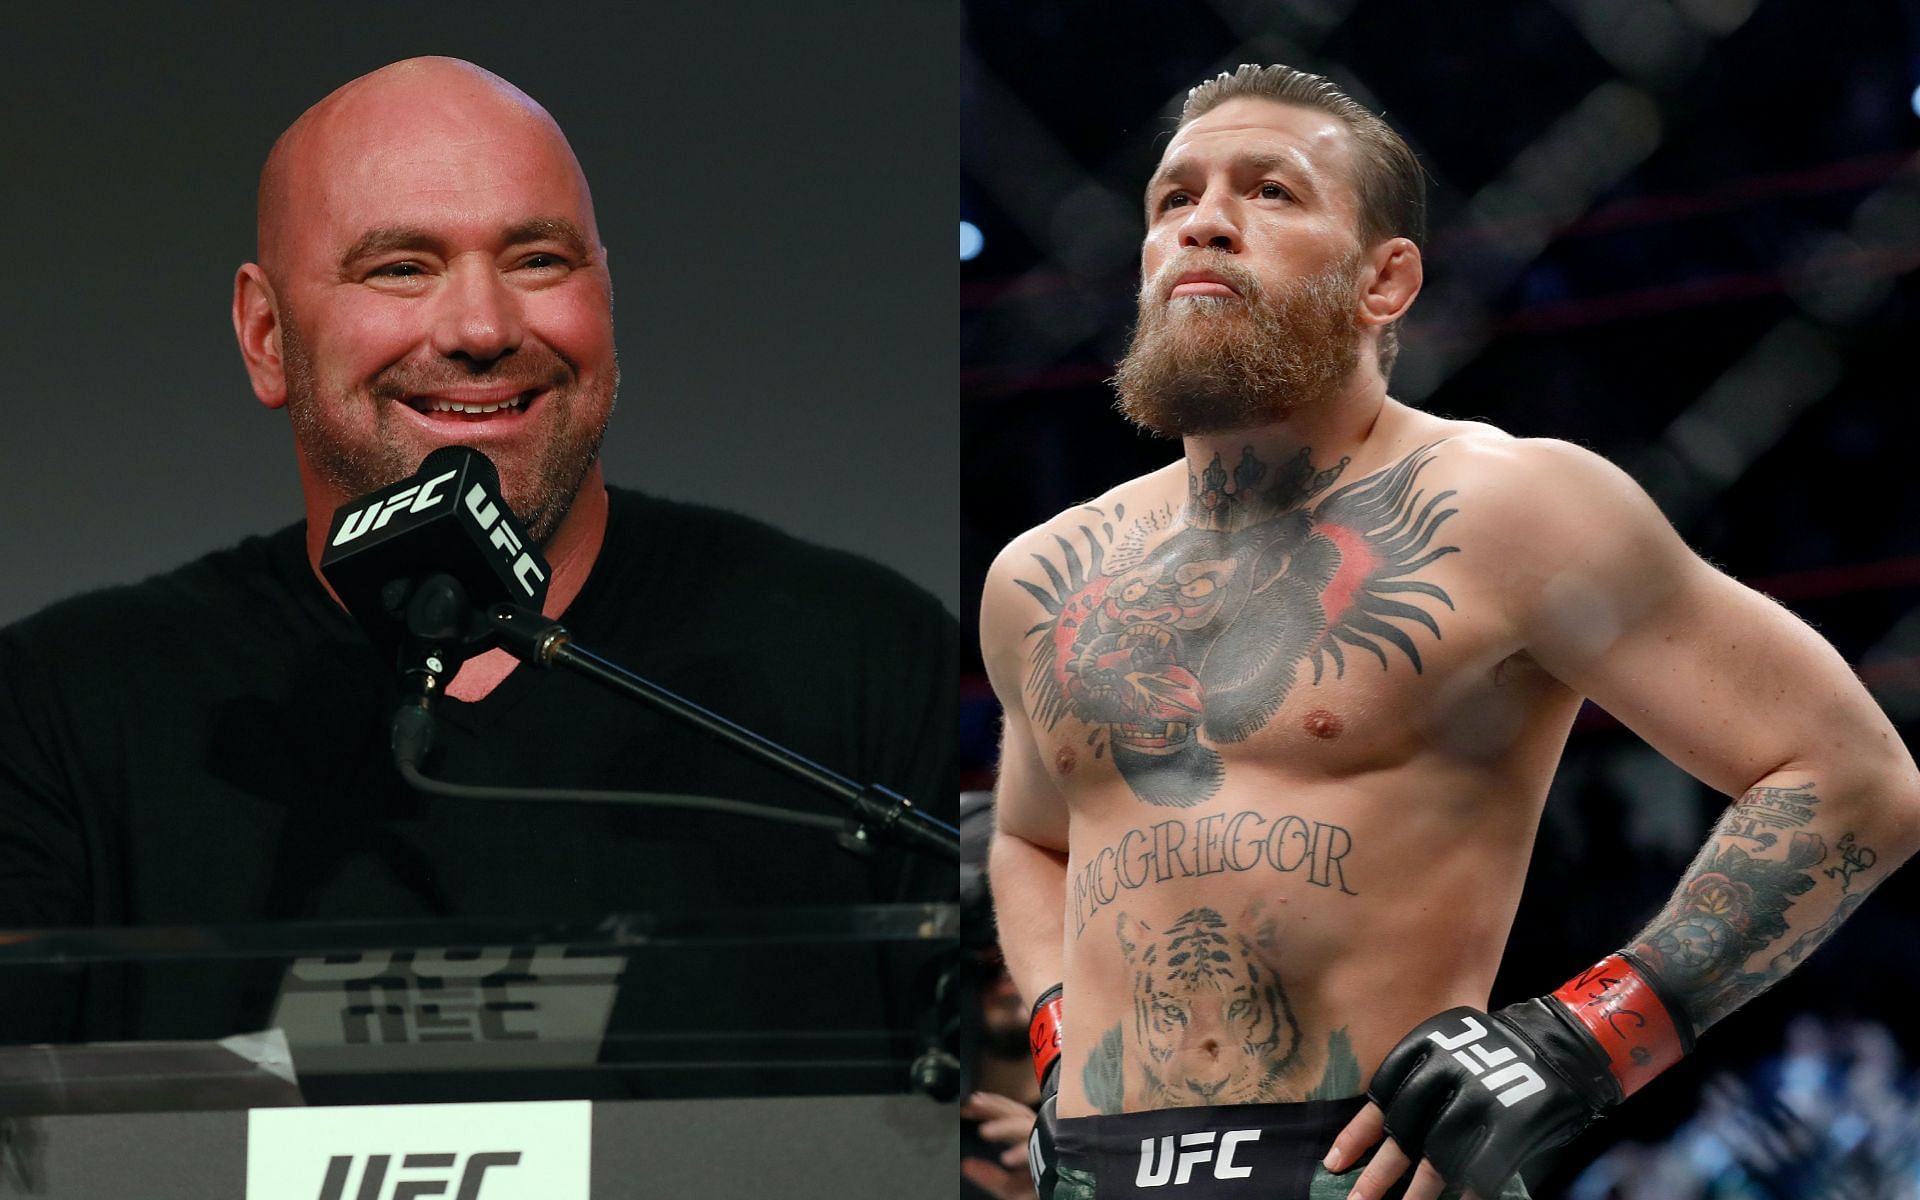 Dana White and Conor McGregor [Image credits: Getty Images] 